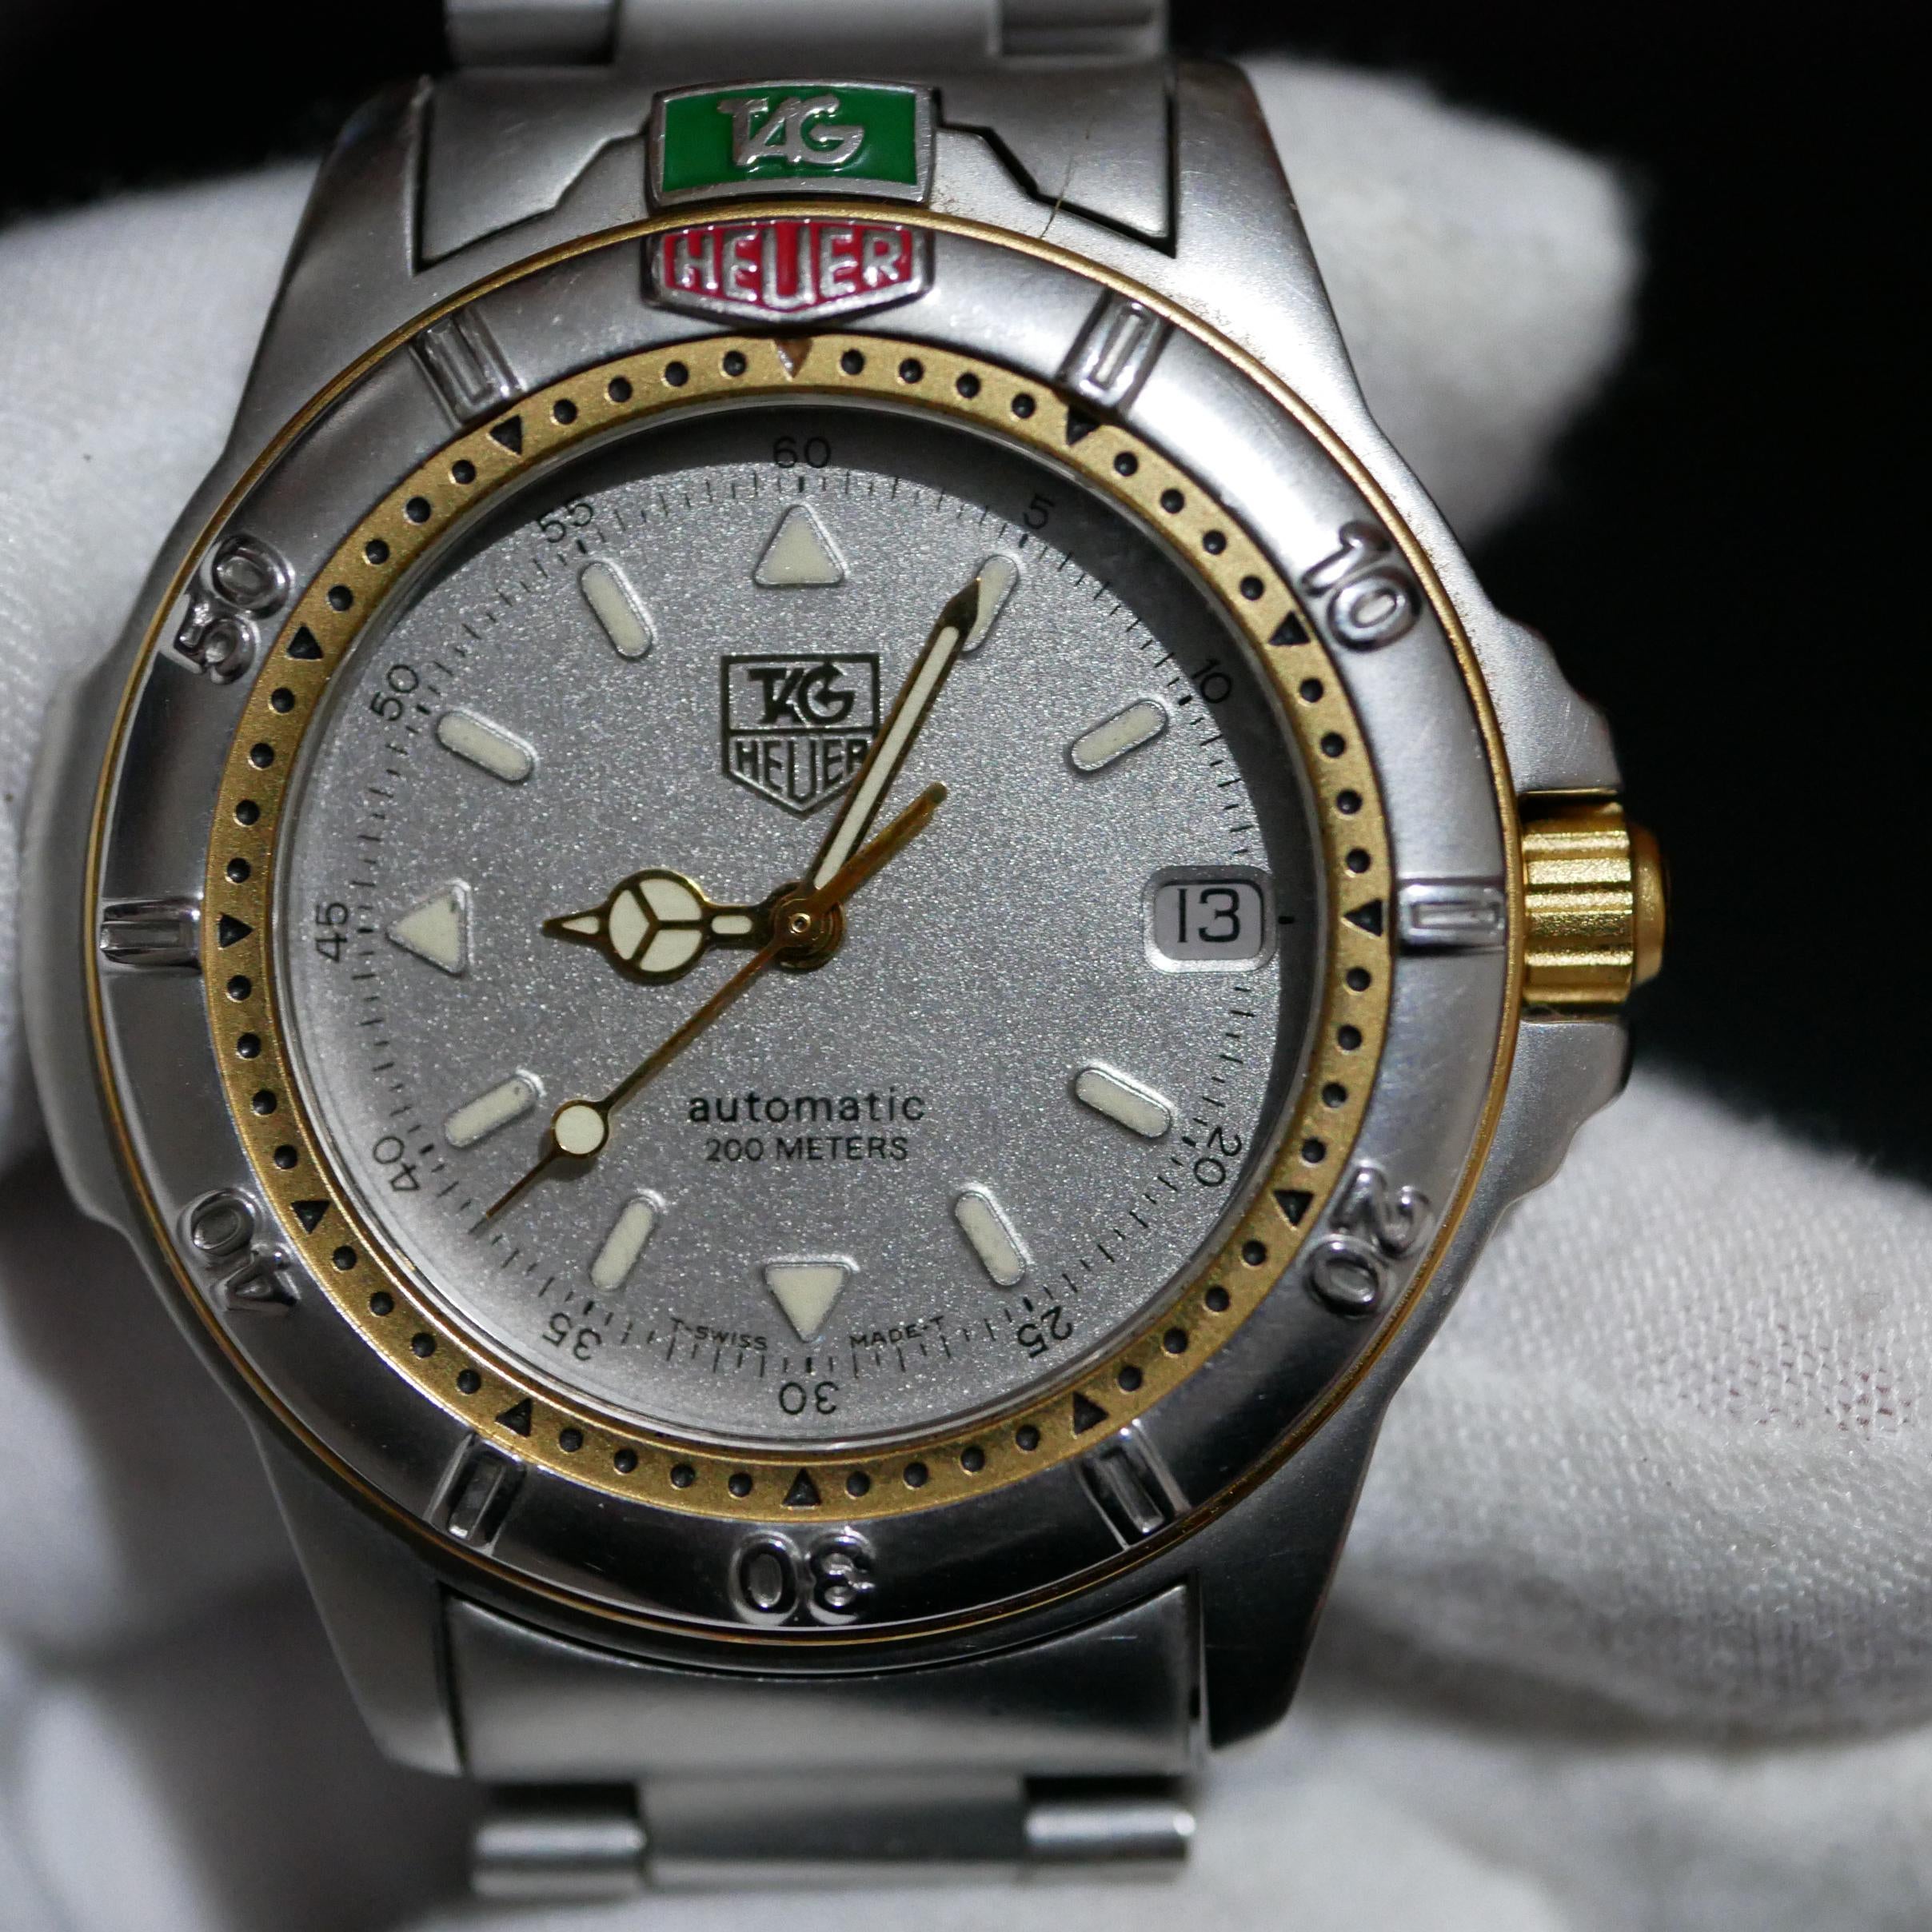 1994 Tag Heuer 4000 automatic vintage watch with box and papers